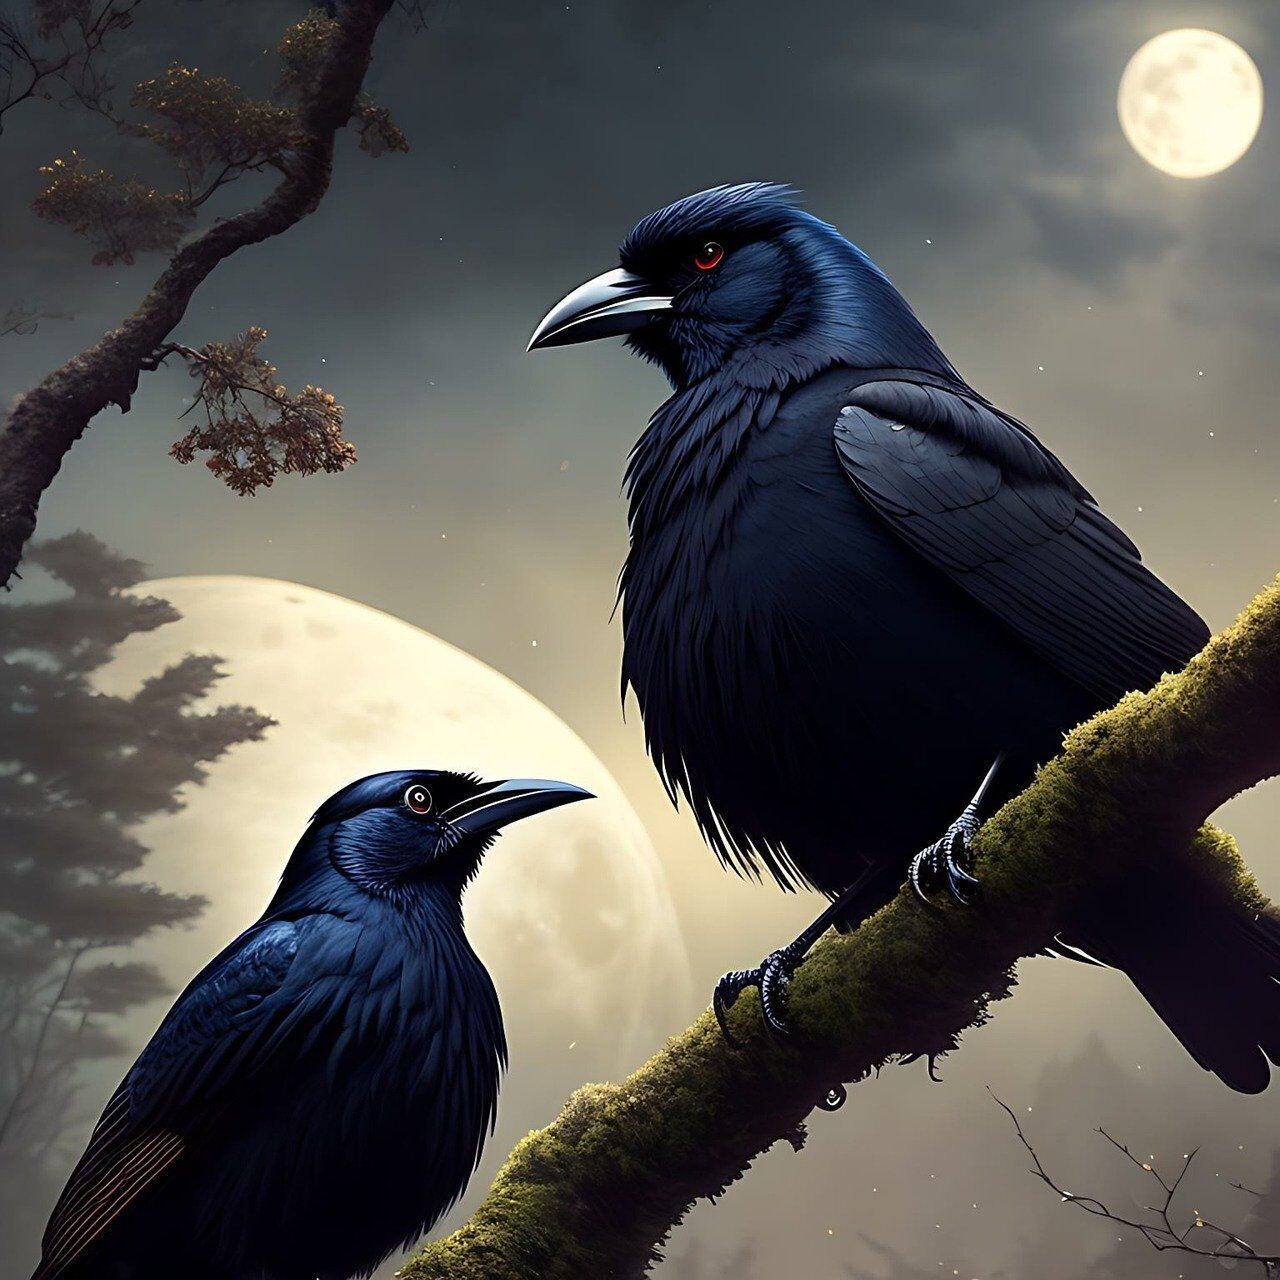 The number of crows is a spiritual meaning